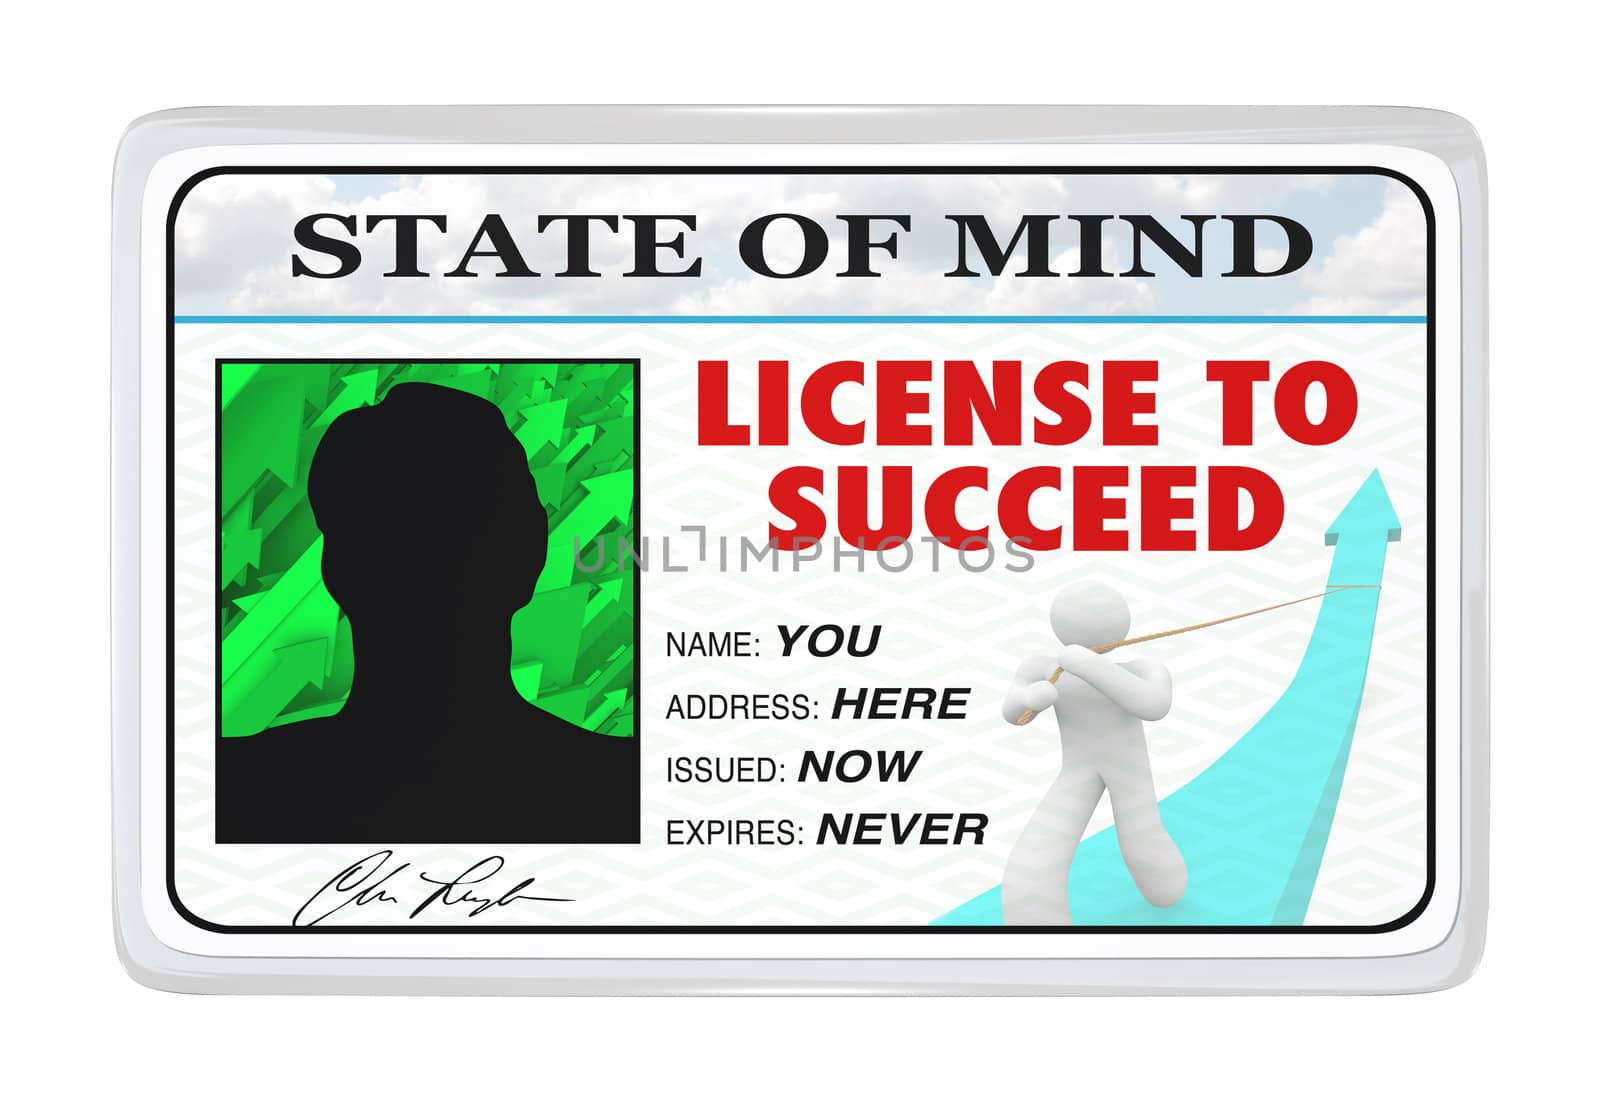 A License to Succeed made out to You at the address Here, issued Now and Expiring Never, representing the potential for success if you believe in yourself